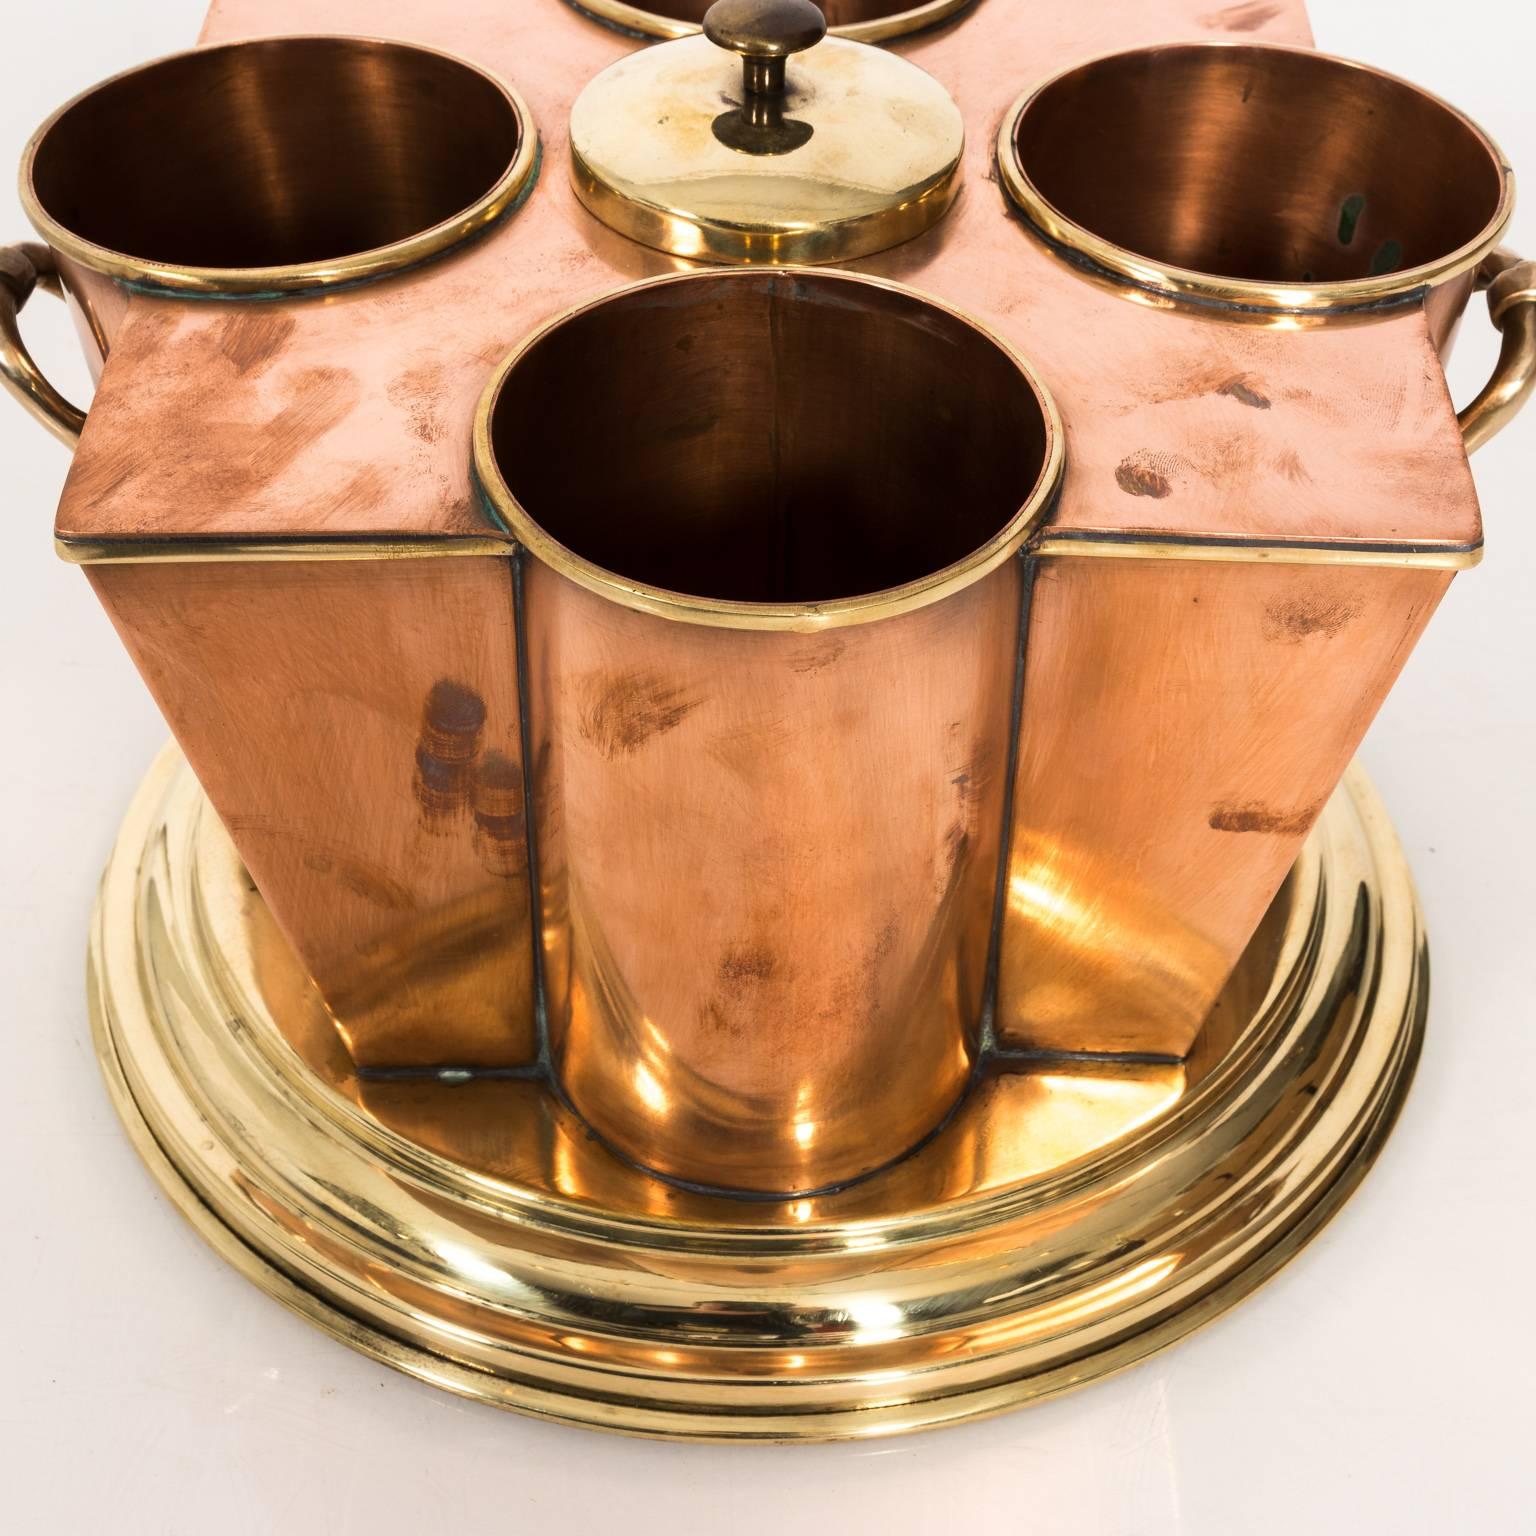 Arts & Crafts English copper and brass wine cooler with five compartments on a round base in a polished finish, circa 1910.
 